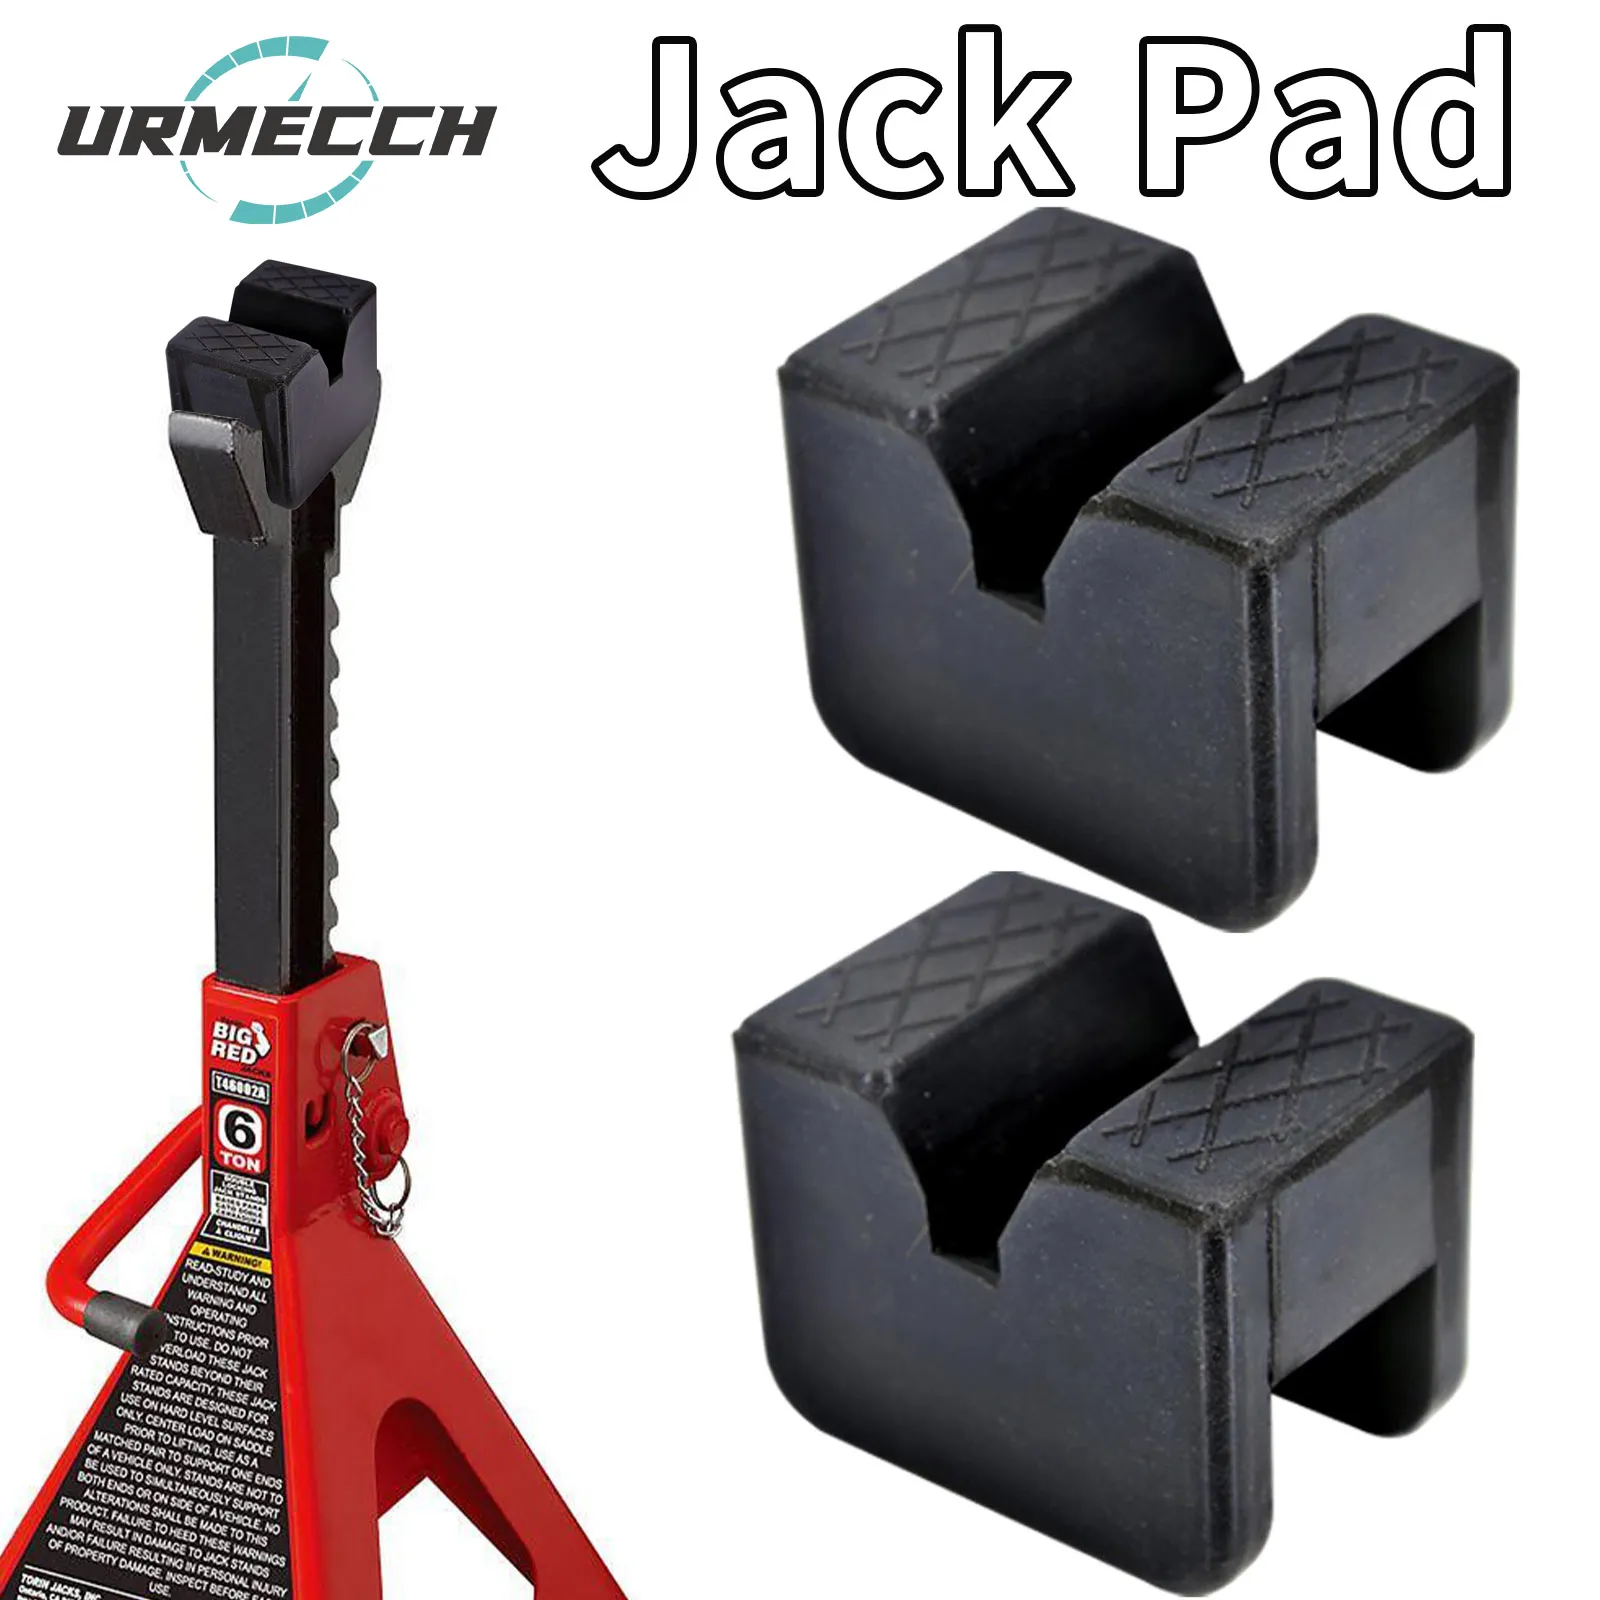 2x Universal Rubber Slotted Square Jack Pad Adapters For Stand Car Lift Lifting Adaptor With Frame Stand Rail Pinch Max 3 Tons